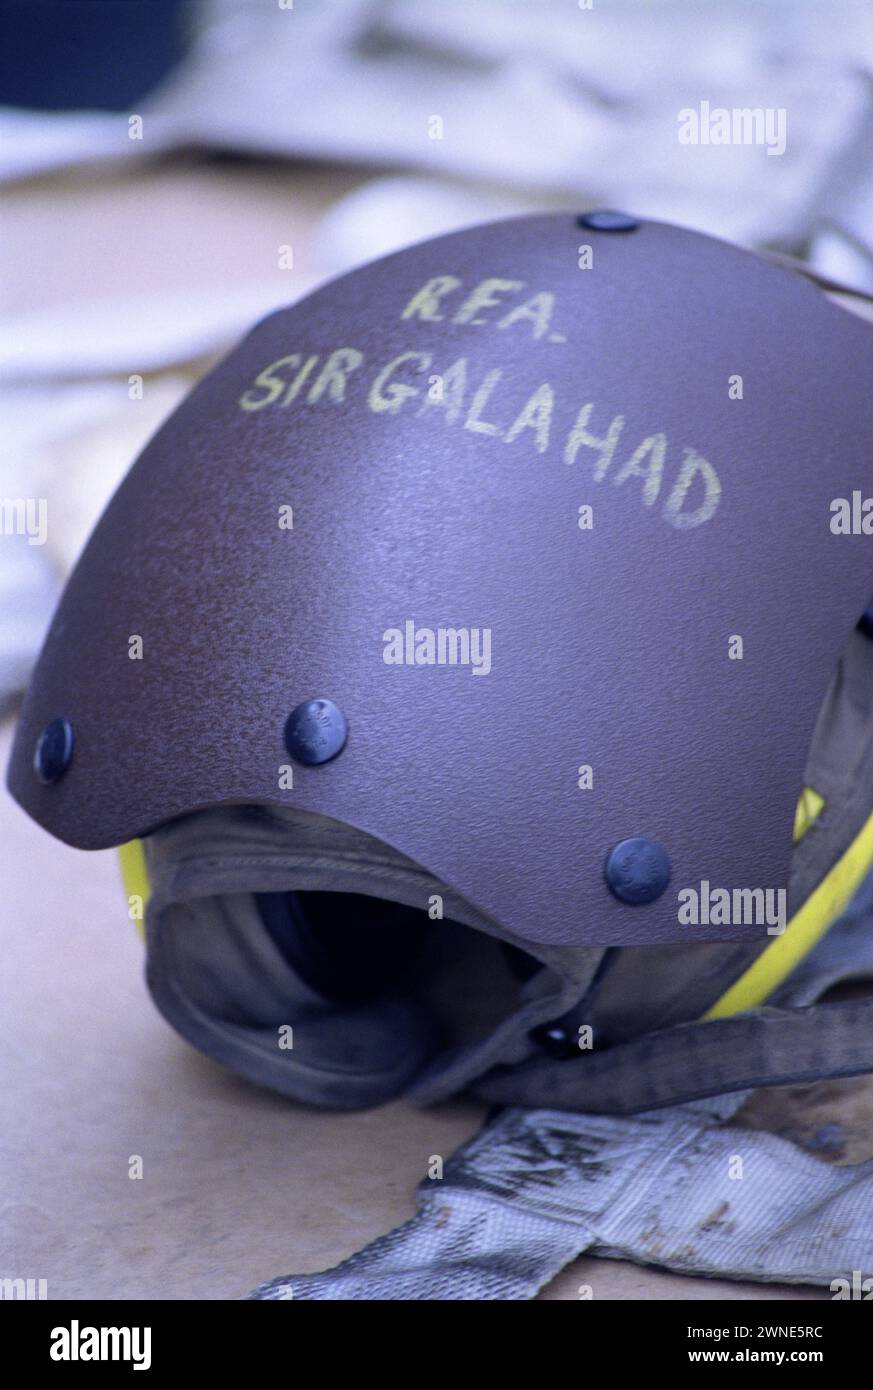 20th March 1991 A Royal Navy crew member's helmet on the RFA Sir Galahad in the Persian Gulf, in Kuwait. Stock Photo